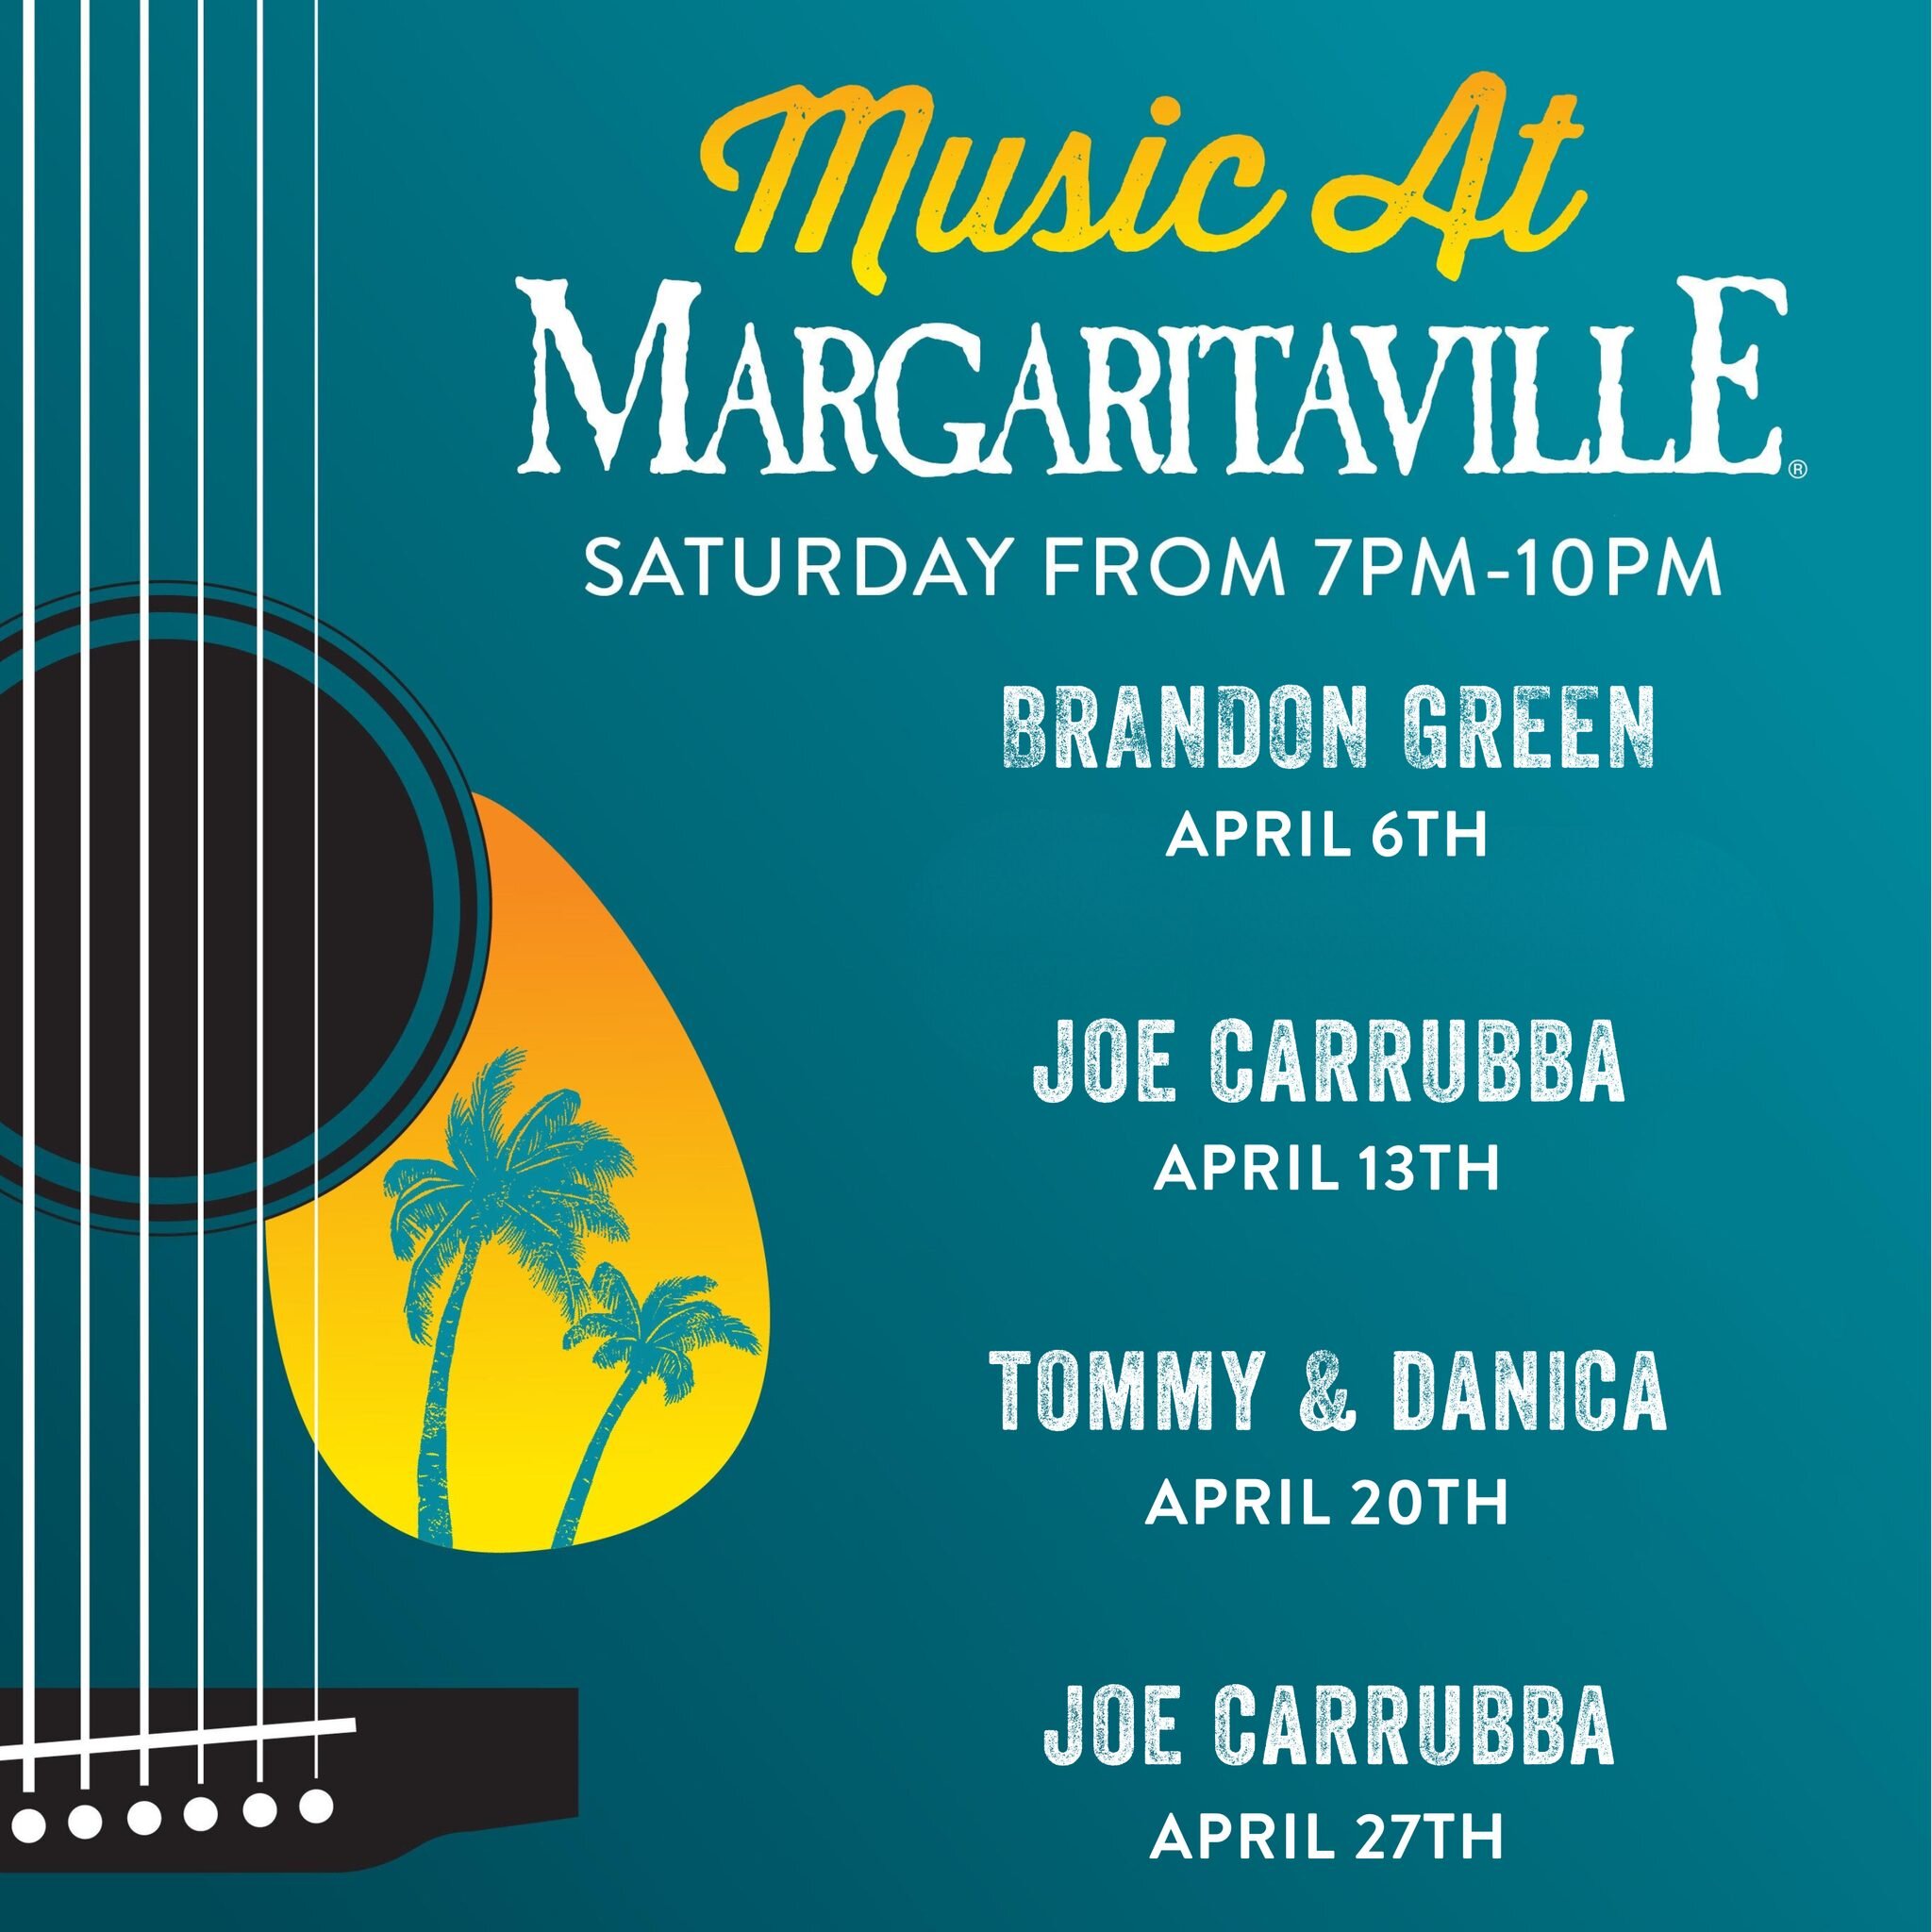 Saturday's at Margaritaville Cafe couldn't get any better! Live music and margarita's are calling your name! Will we see you there?

#livemusic #liveentertainment #biloxims #livemusicinbiloxi